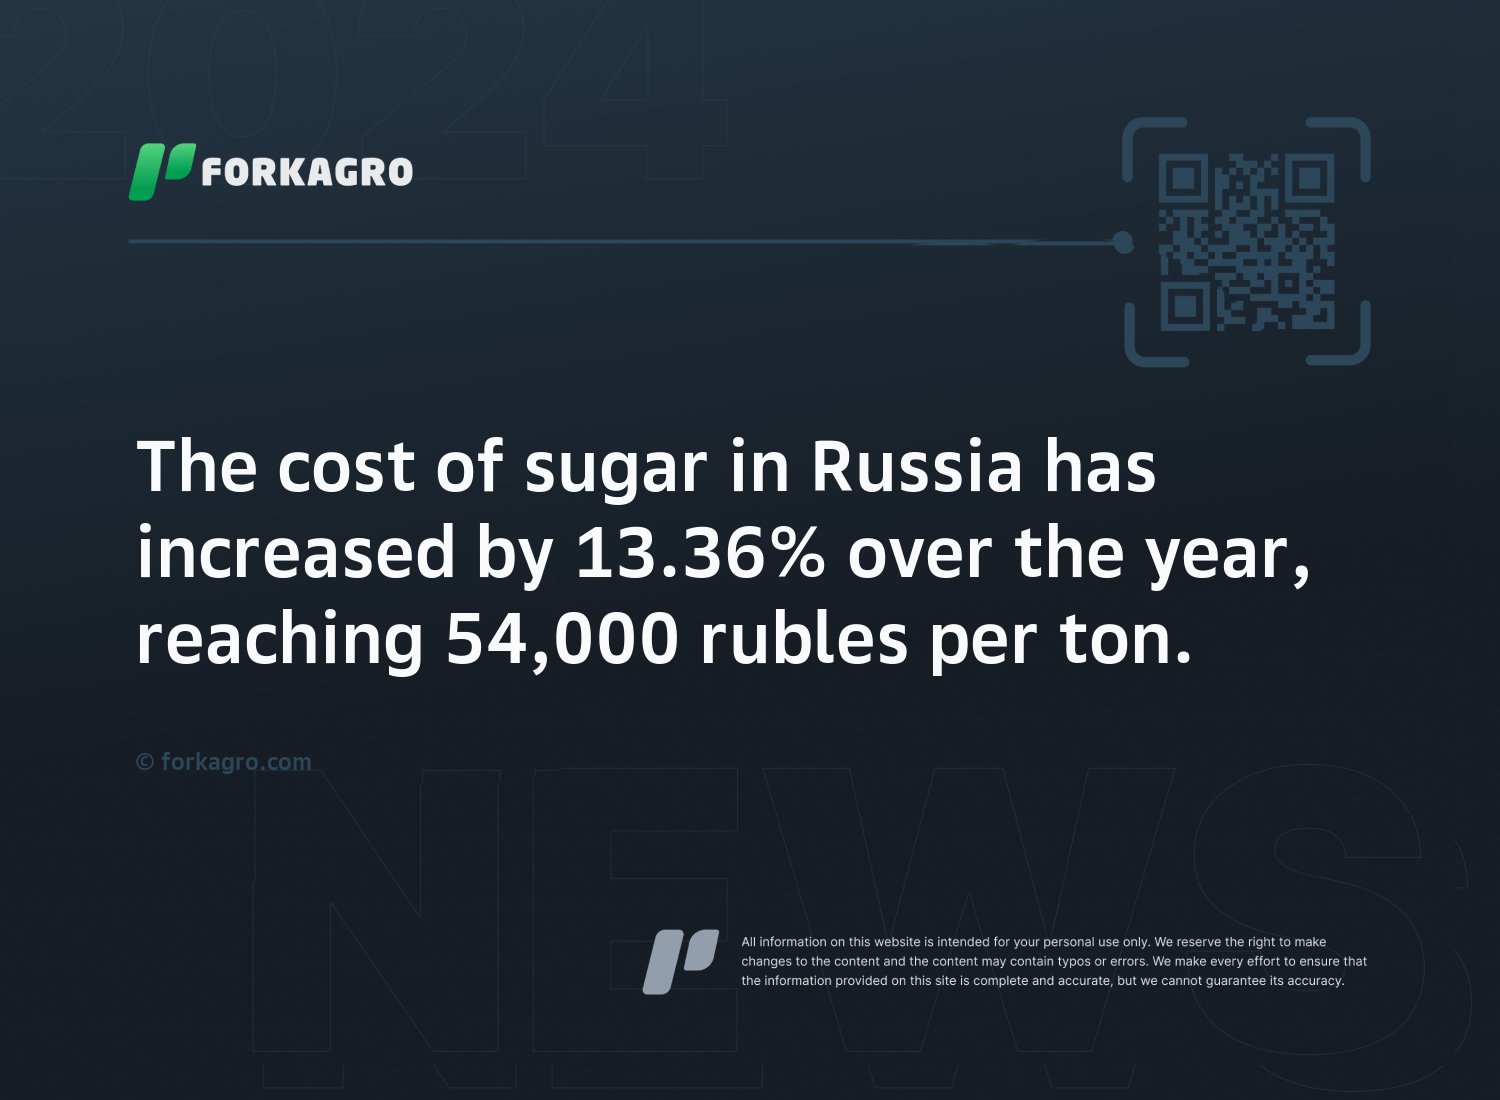 The cost of sugar in Russia has increased by 13.36% over the year, reaching 54,000 rubles per ton.